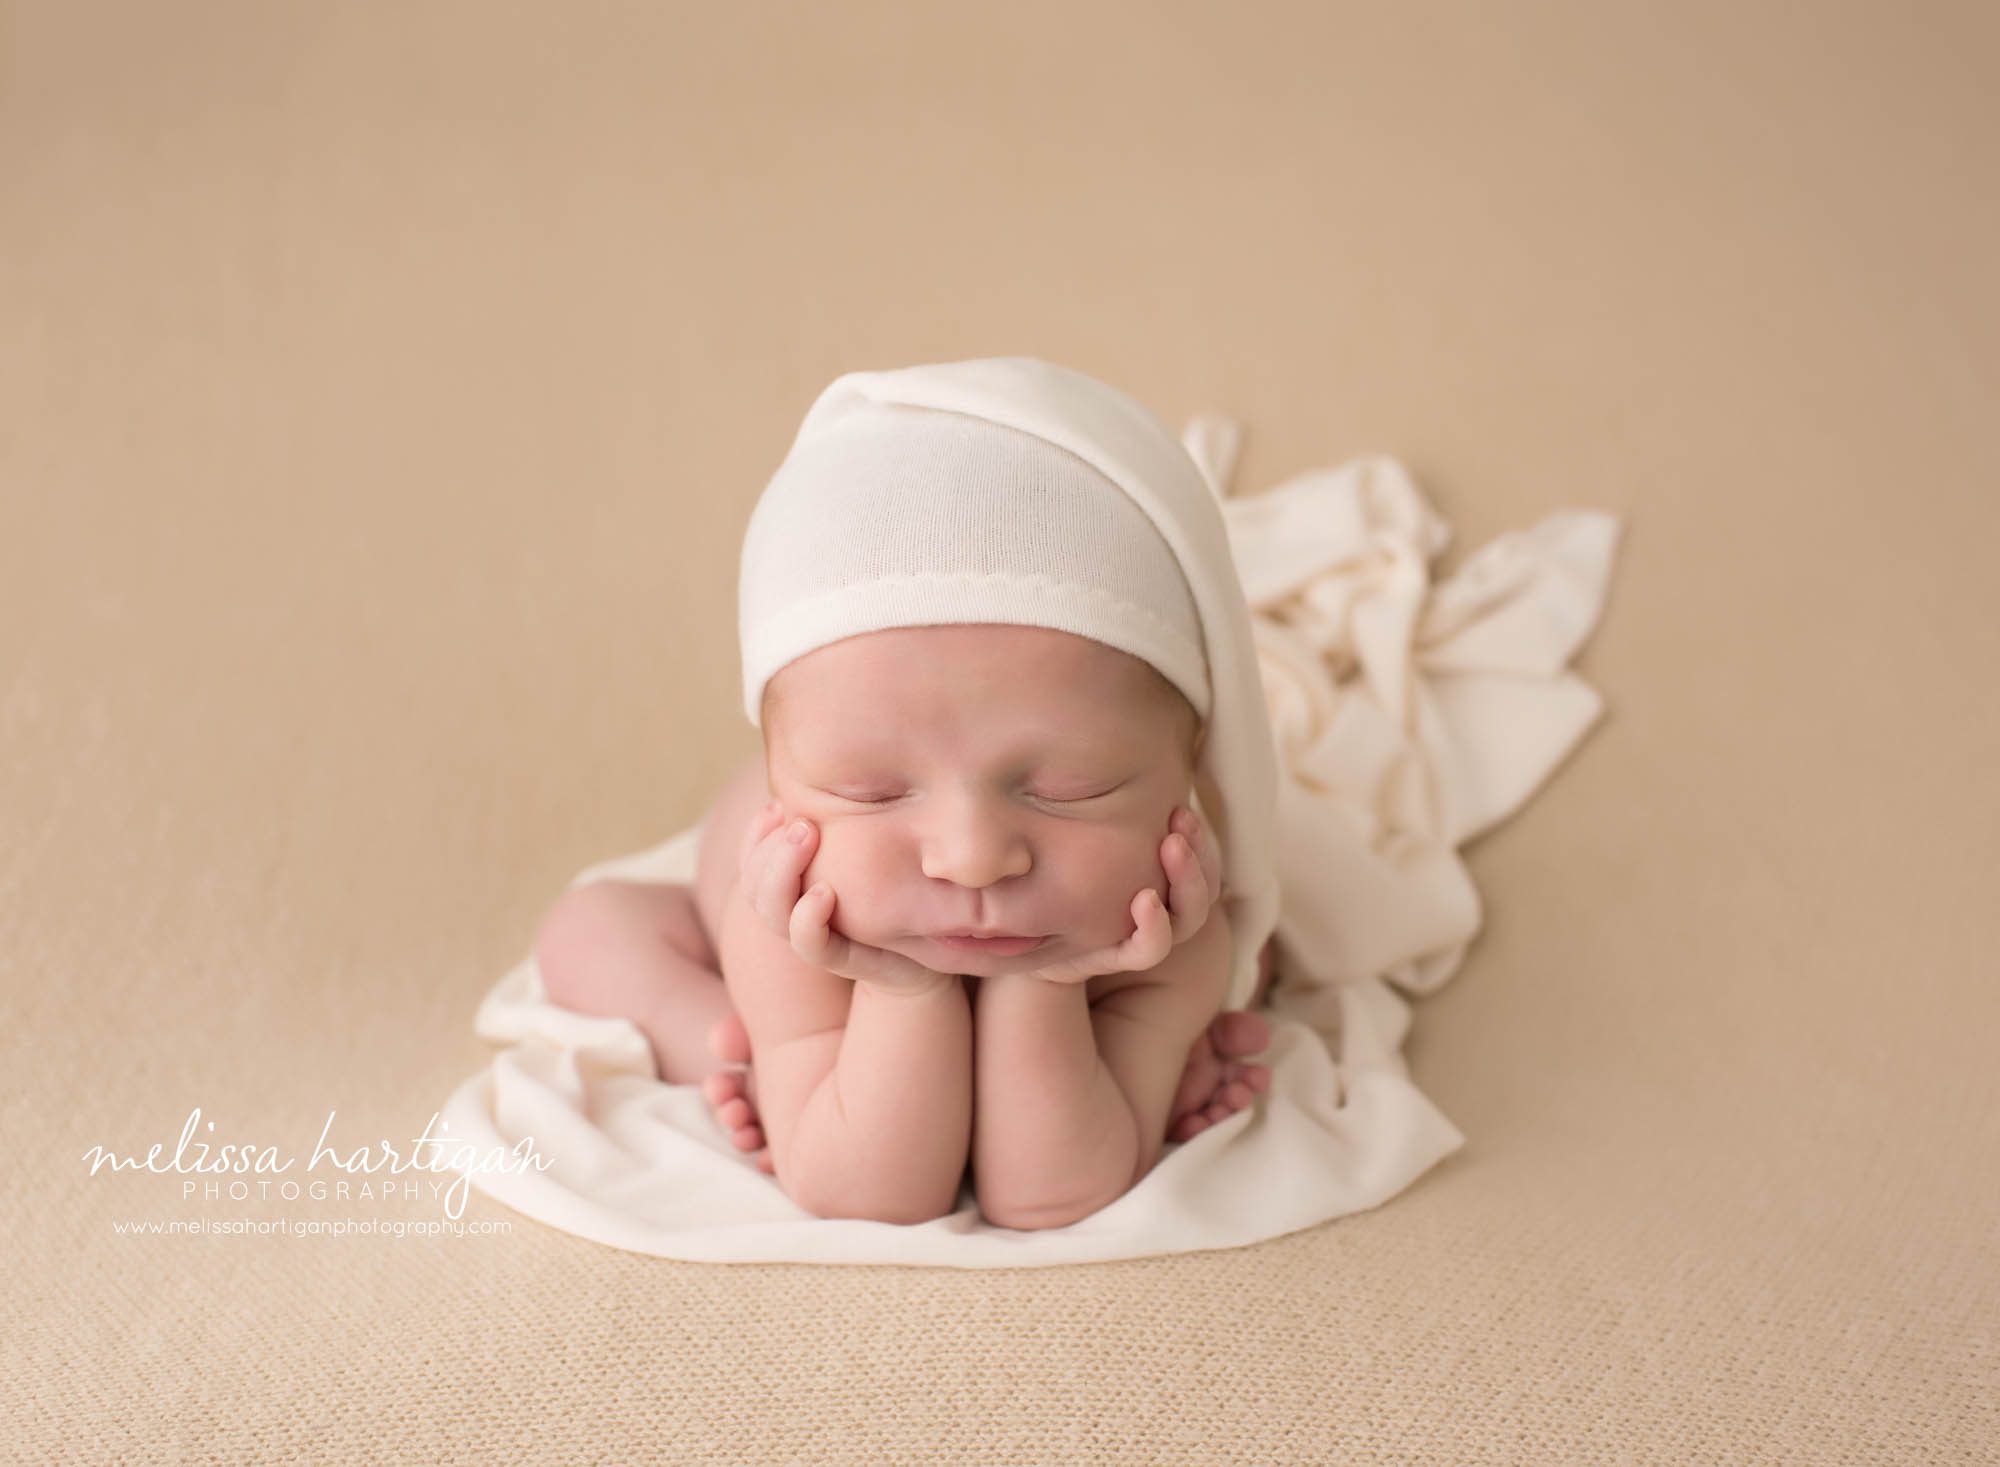 Melissa Hartigan Photography Newborn Photographer Connecticut baby boy in froggy pose wearing white knit hat on matching wrap sleeping